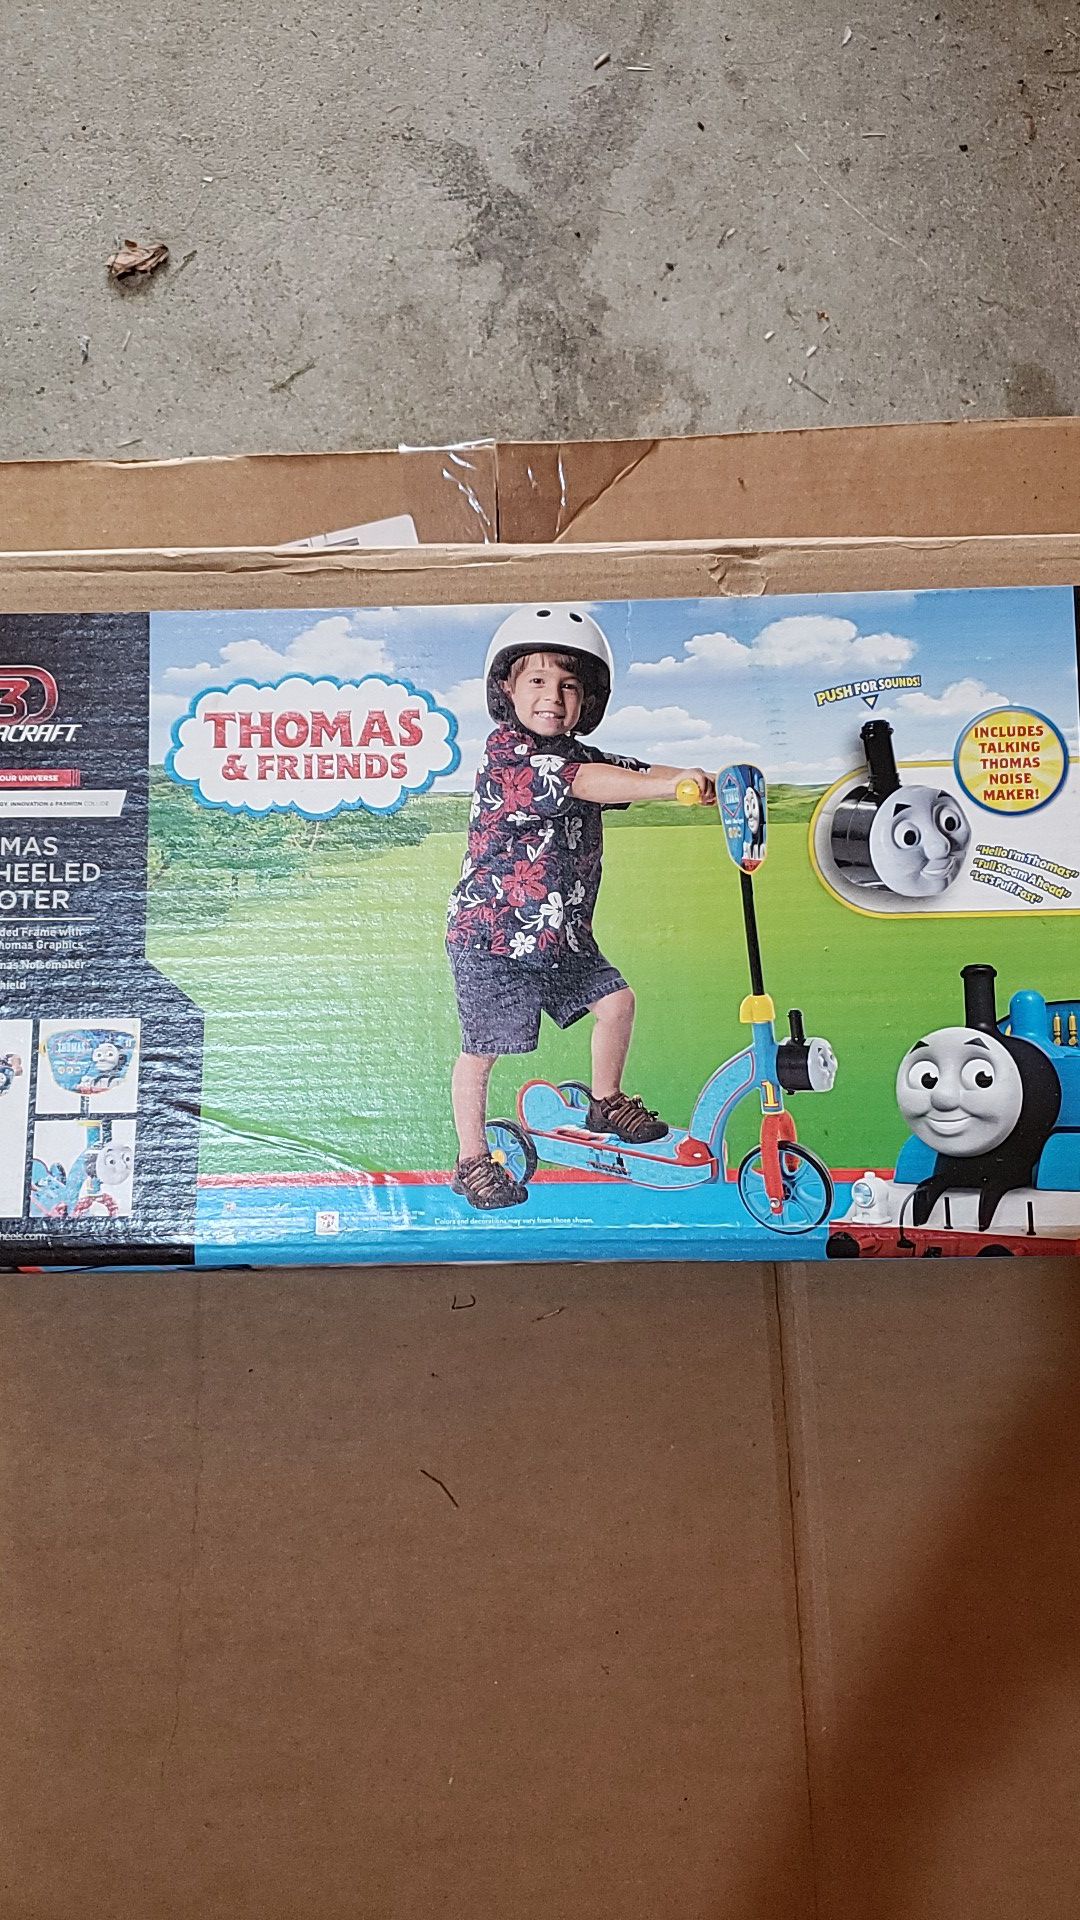 Thomas and Friends 3 wheeled scooter